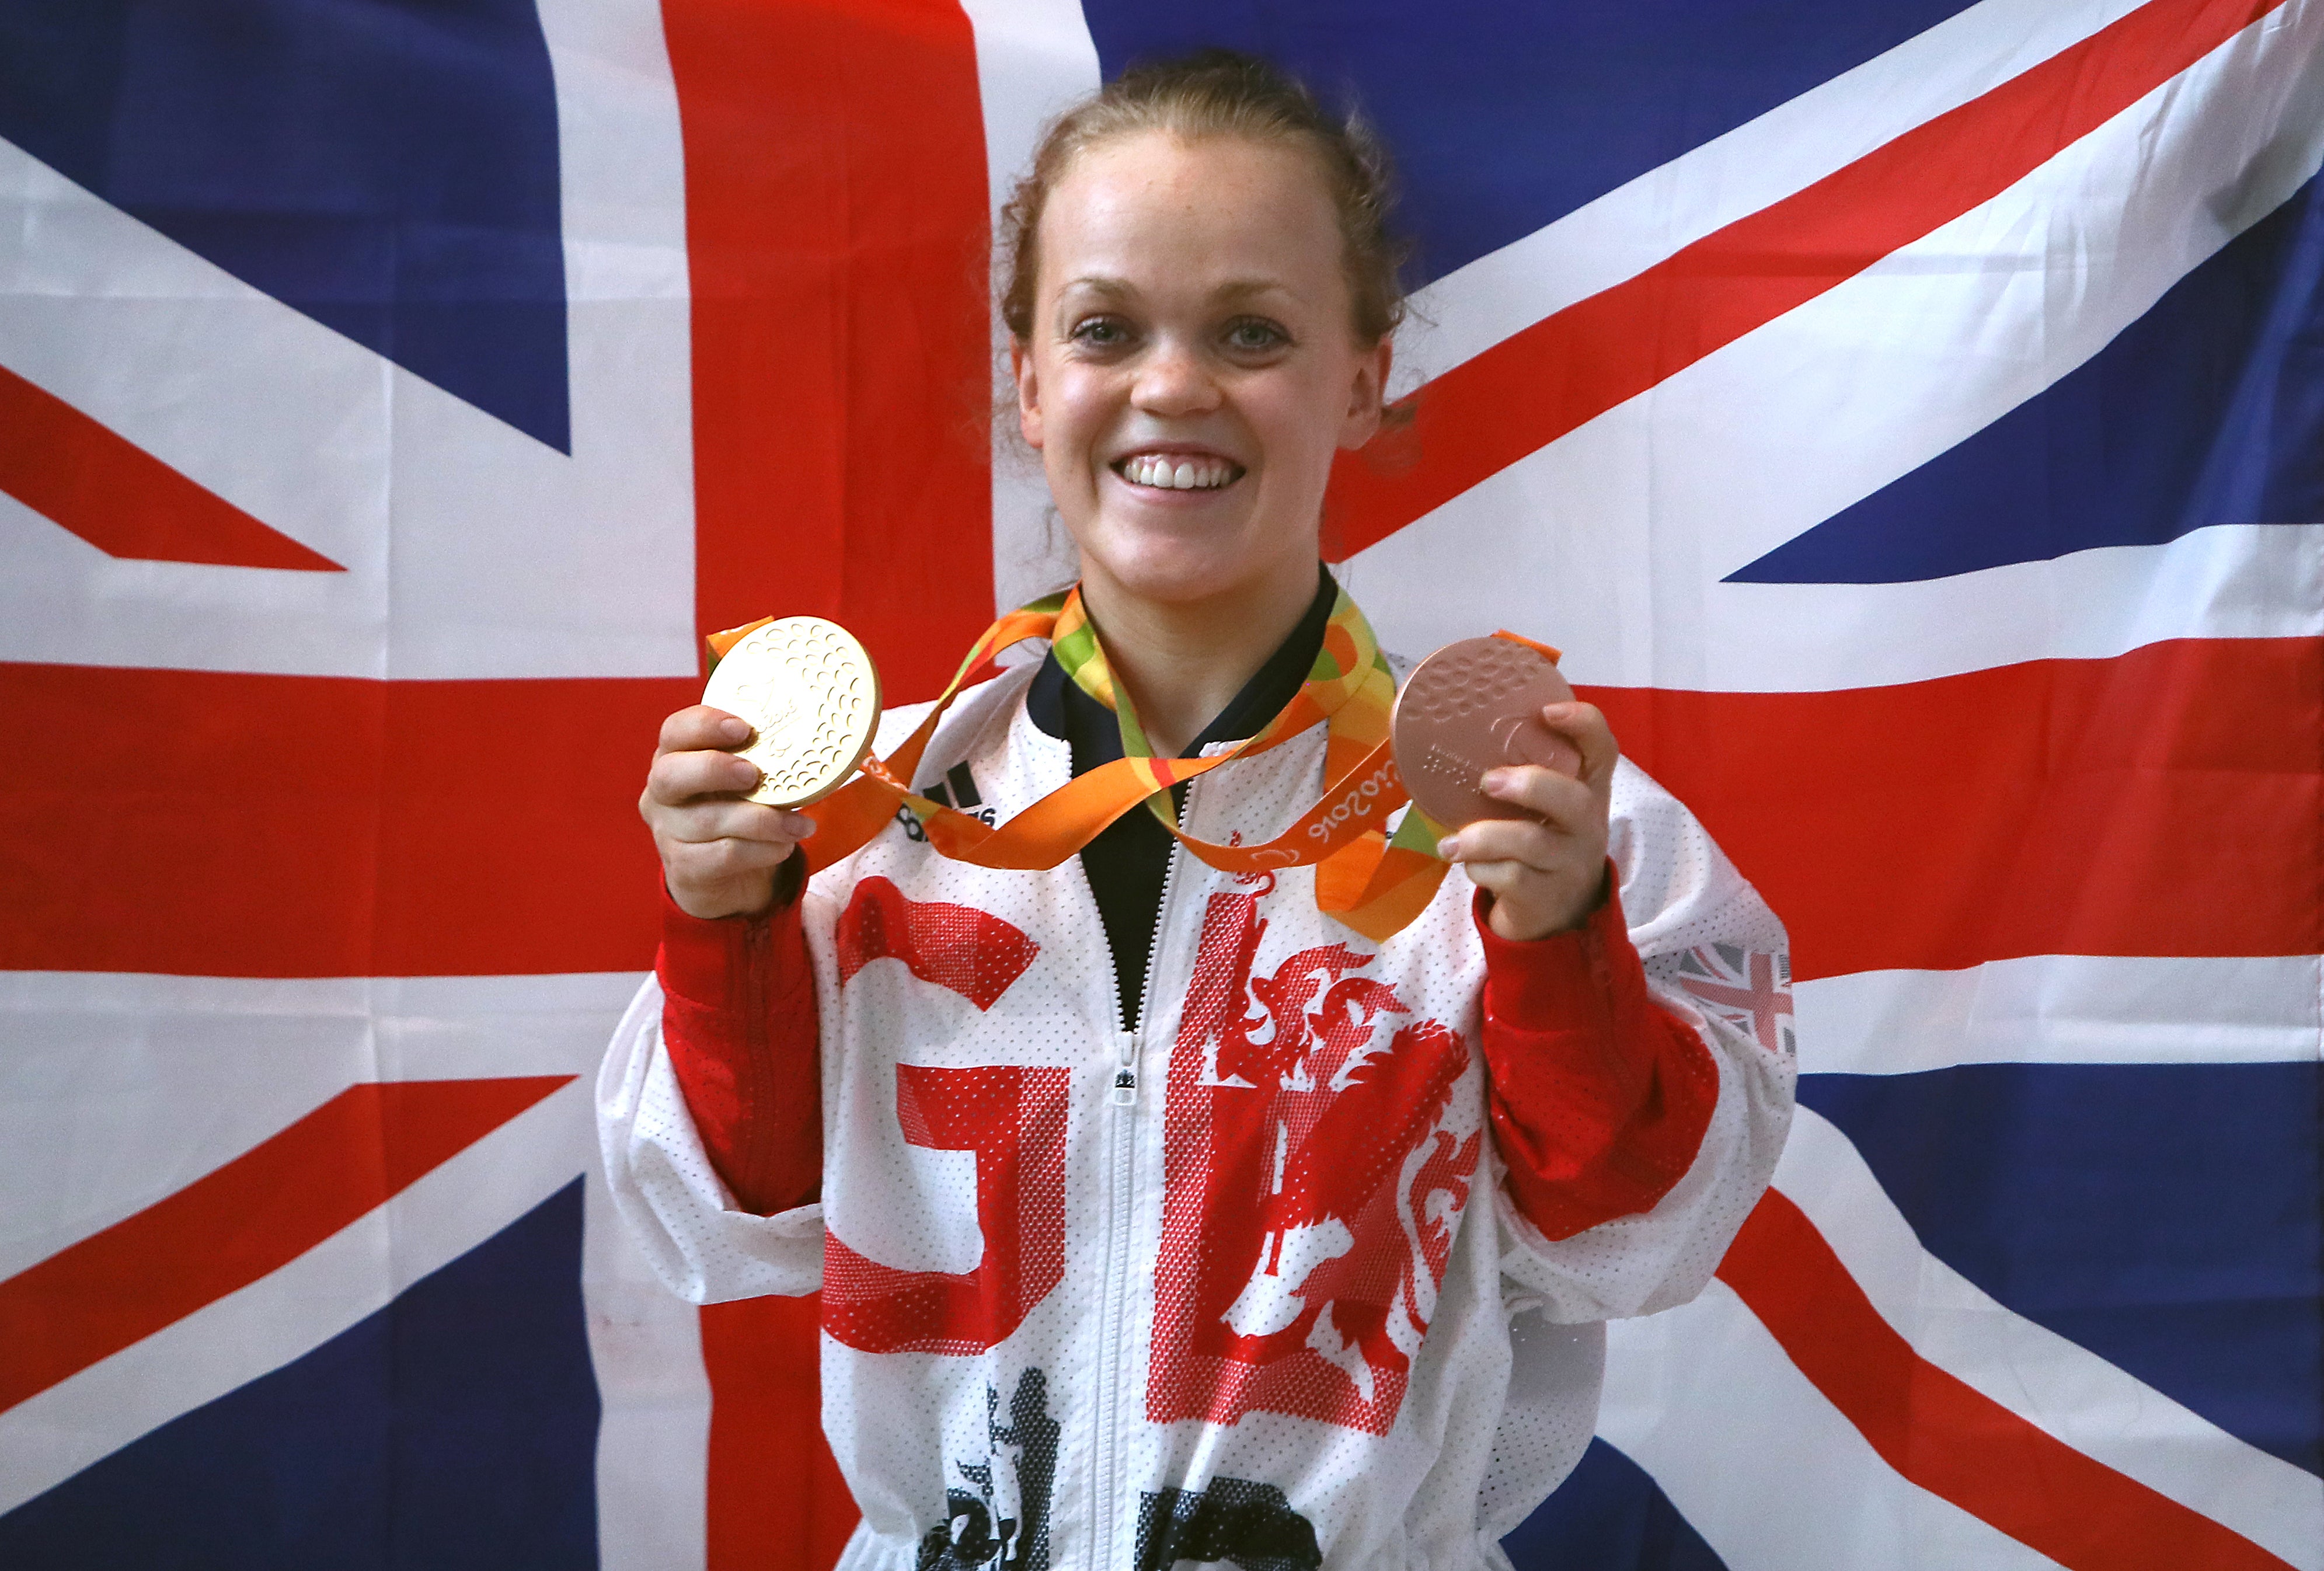 Simmonds is one of British para sport’s most recognisable athletes